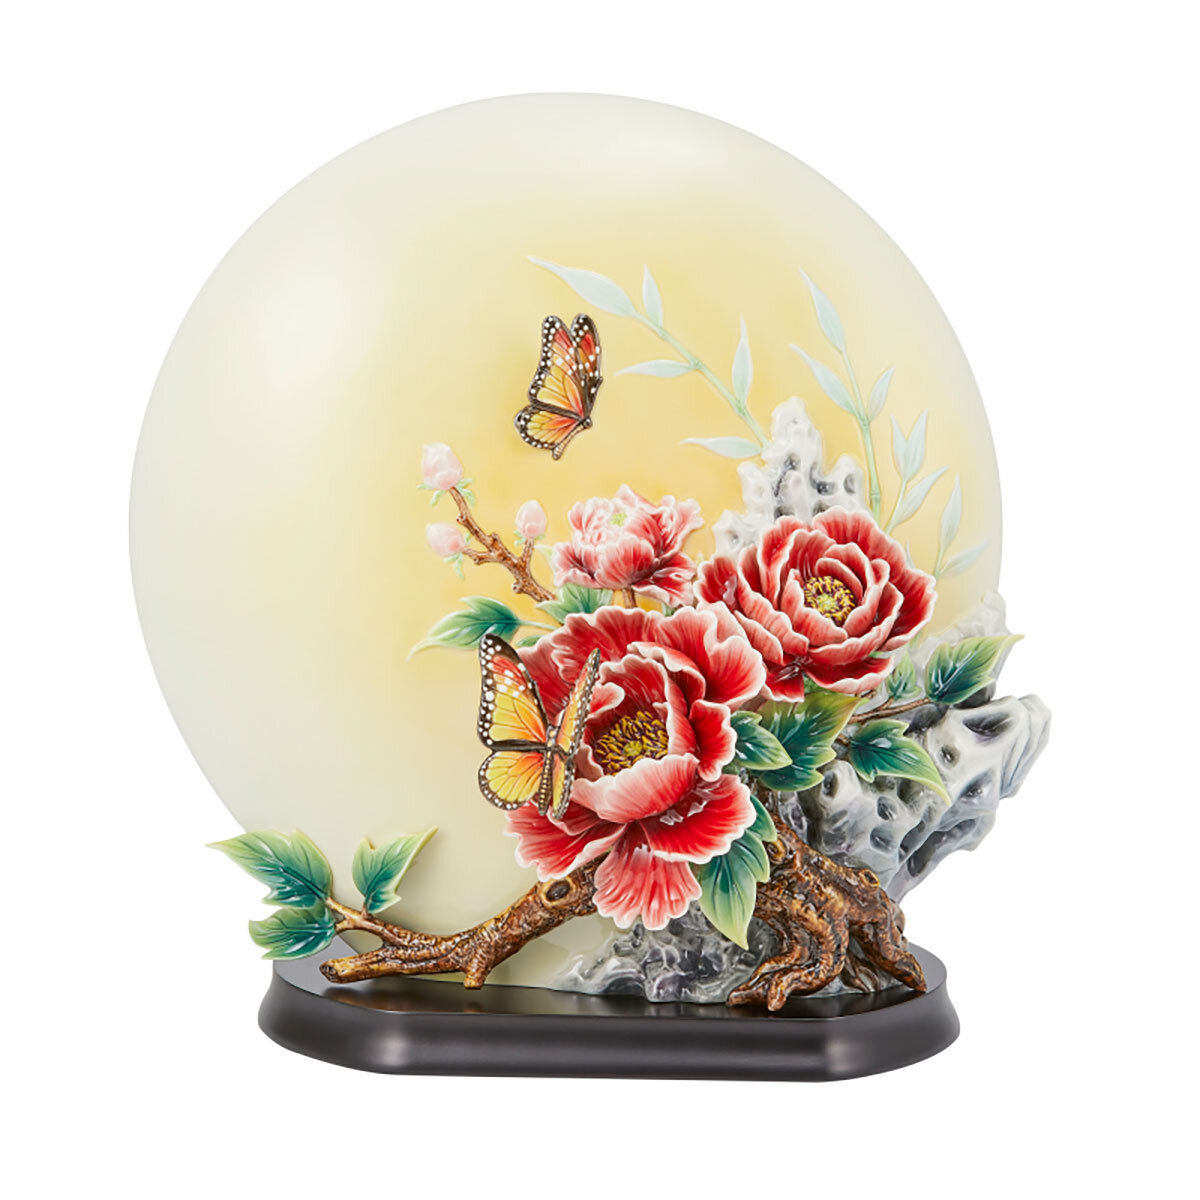 Franz Porcelain Welcoming Happiness Peony And Butterfly Design Sculptured Porcelain Figurine With Wooden Base FZ03836